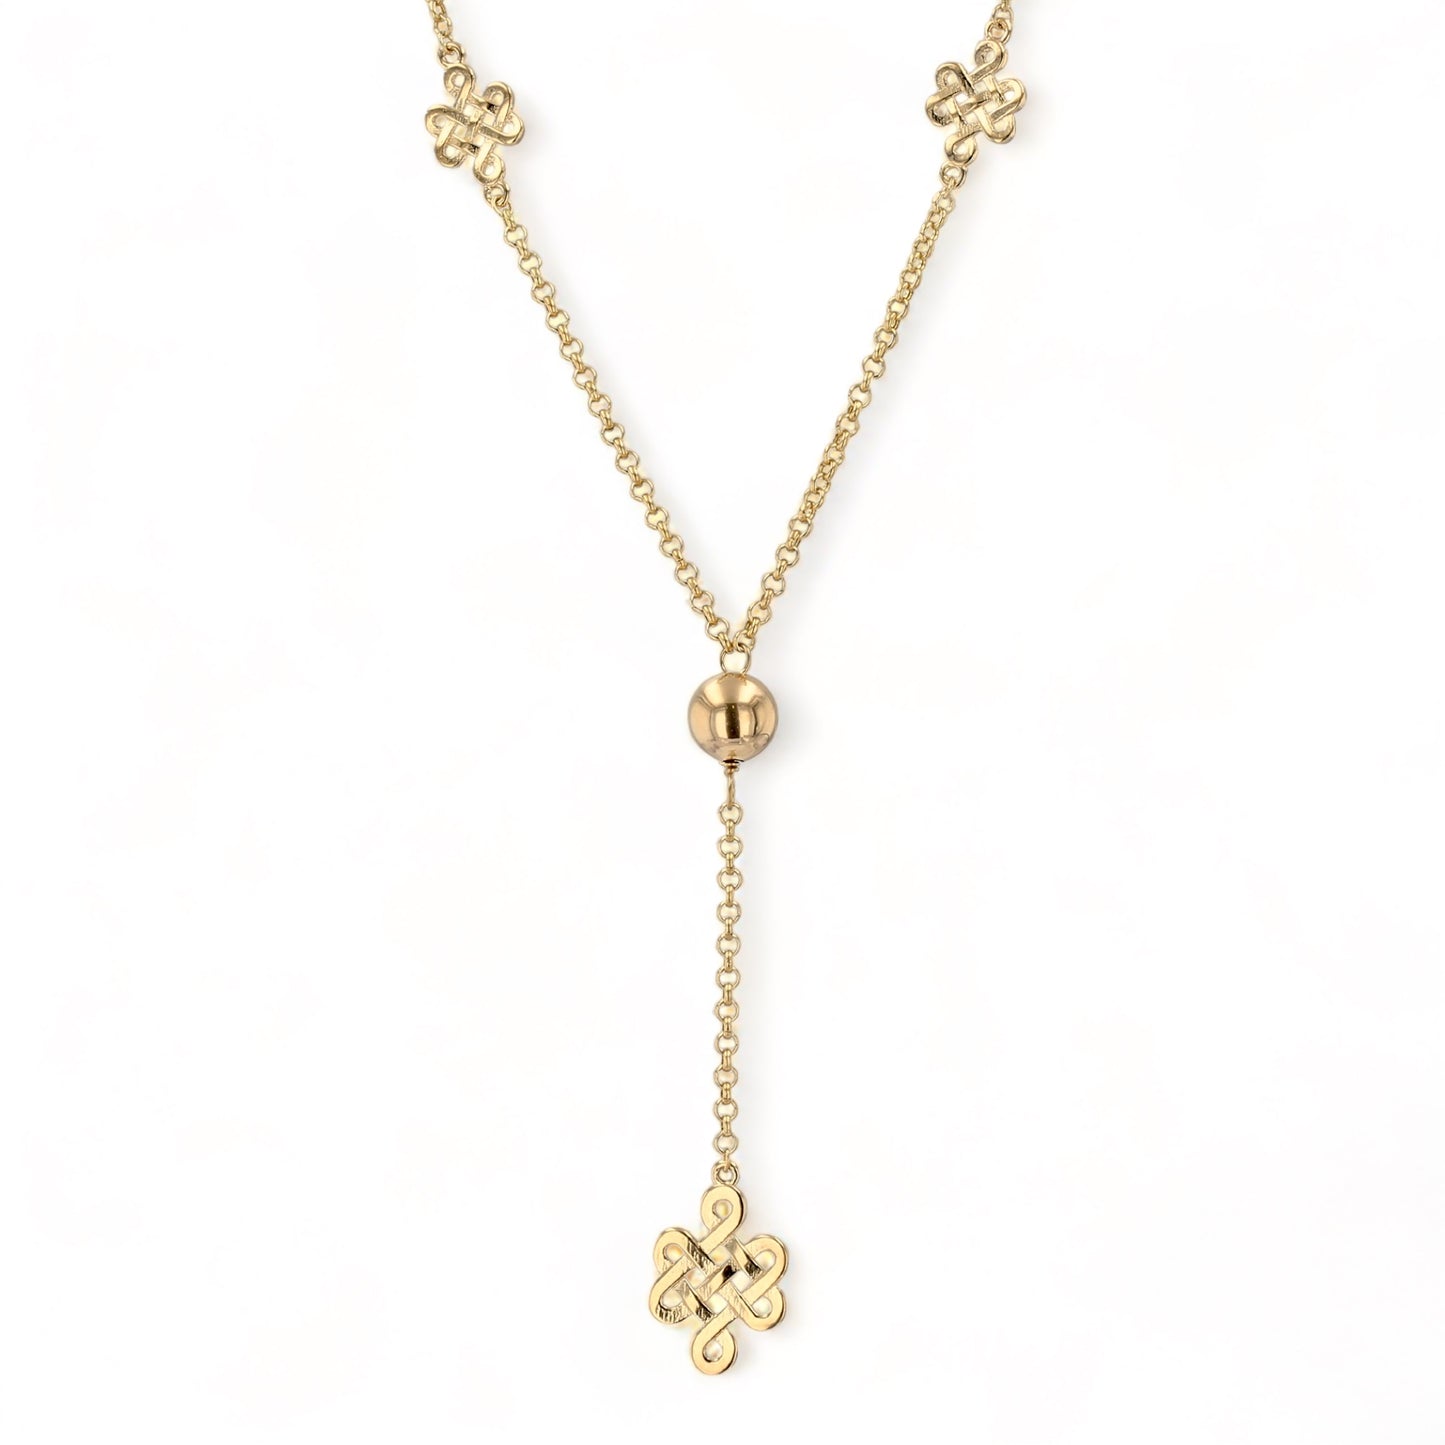 10k yellow gold clover necklace-9001